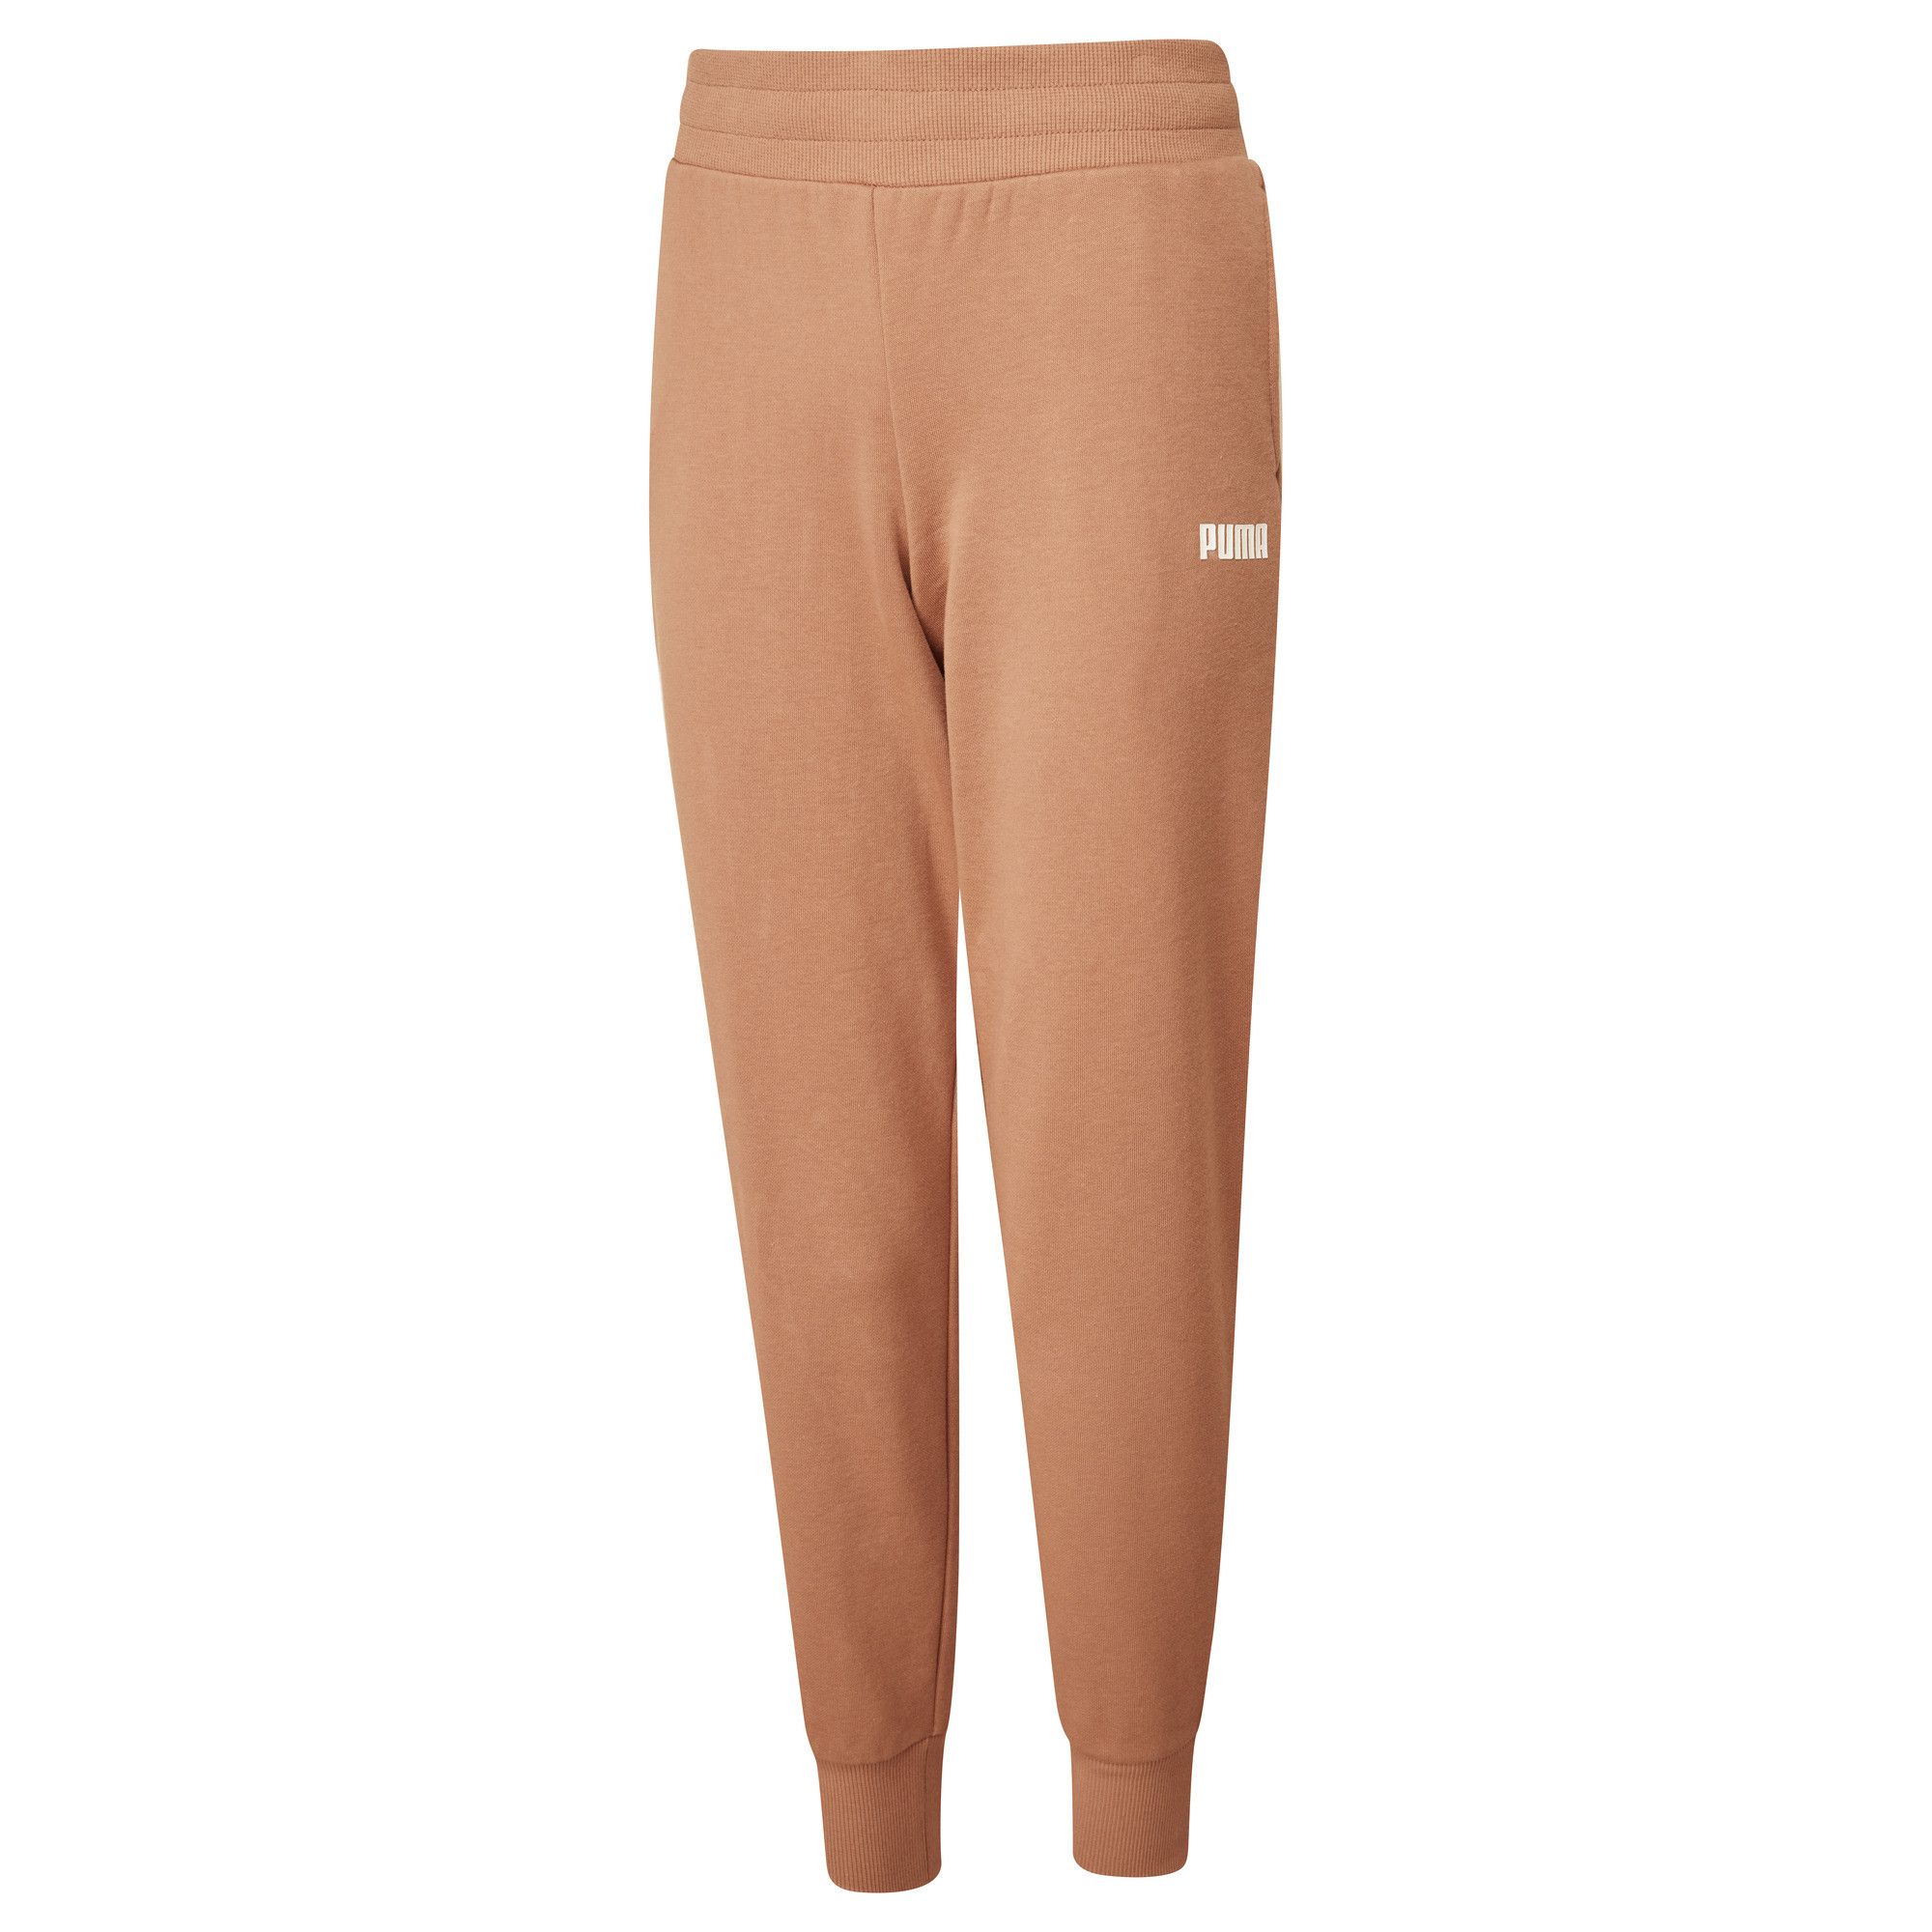 PRODUCT STORYDesigned for comfort, as you'd expect, these full-length sweatpants are going to fast become your go-to weekend wear – or weekday, if you're working from home. Taken from our Essentials Collection, they have plenty of room to move around, making them equally good for hanging out at home as they are for running errands on a Saturday.